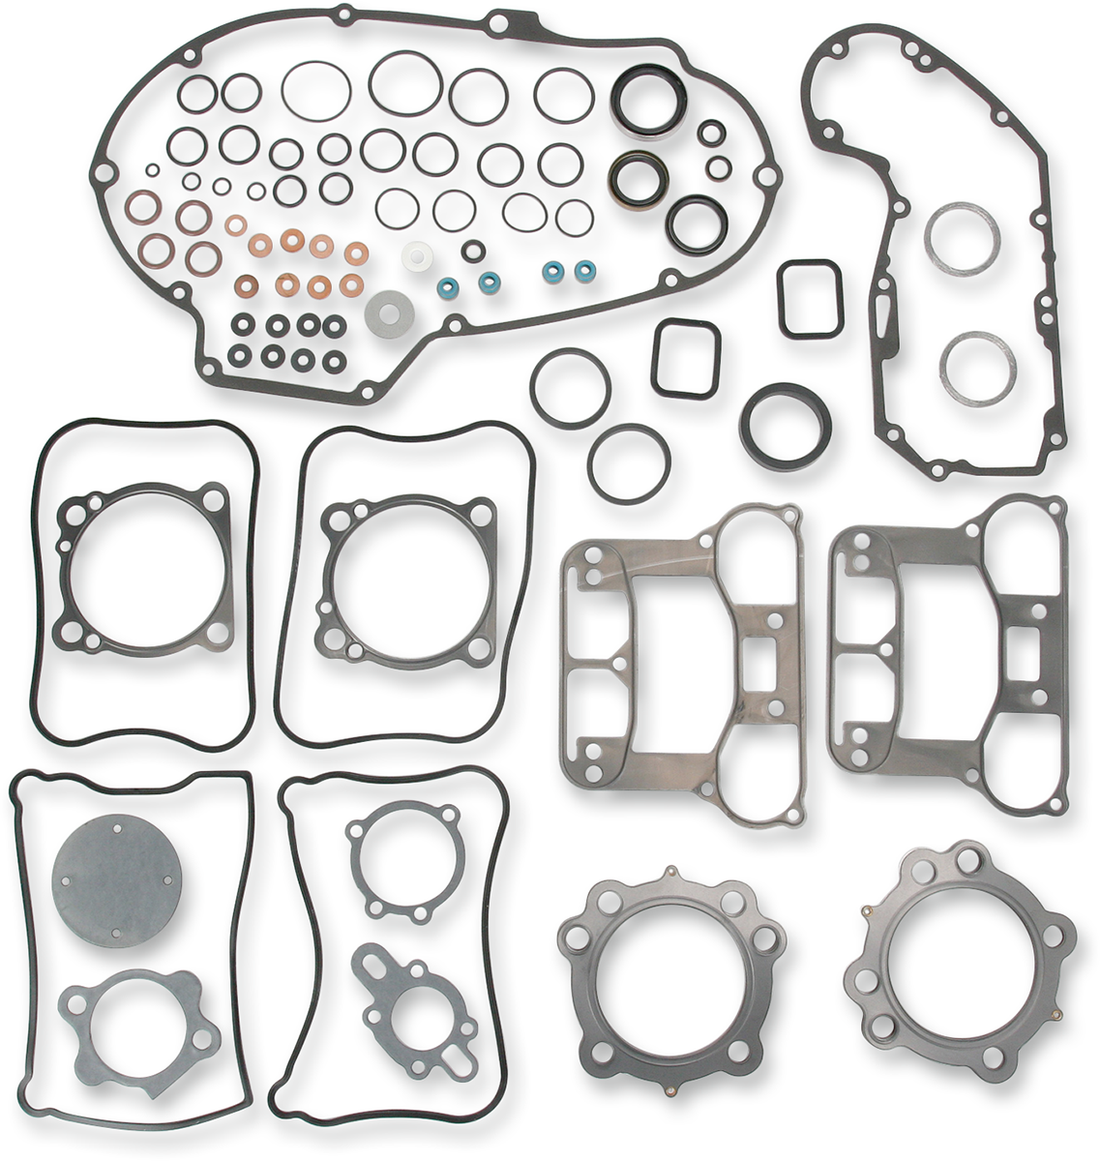 0934-0805 - COMETIC Complete Gasket Kit - 1200 XL C9757F